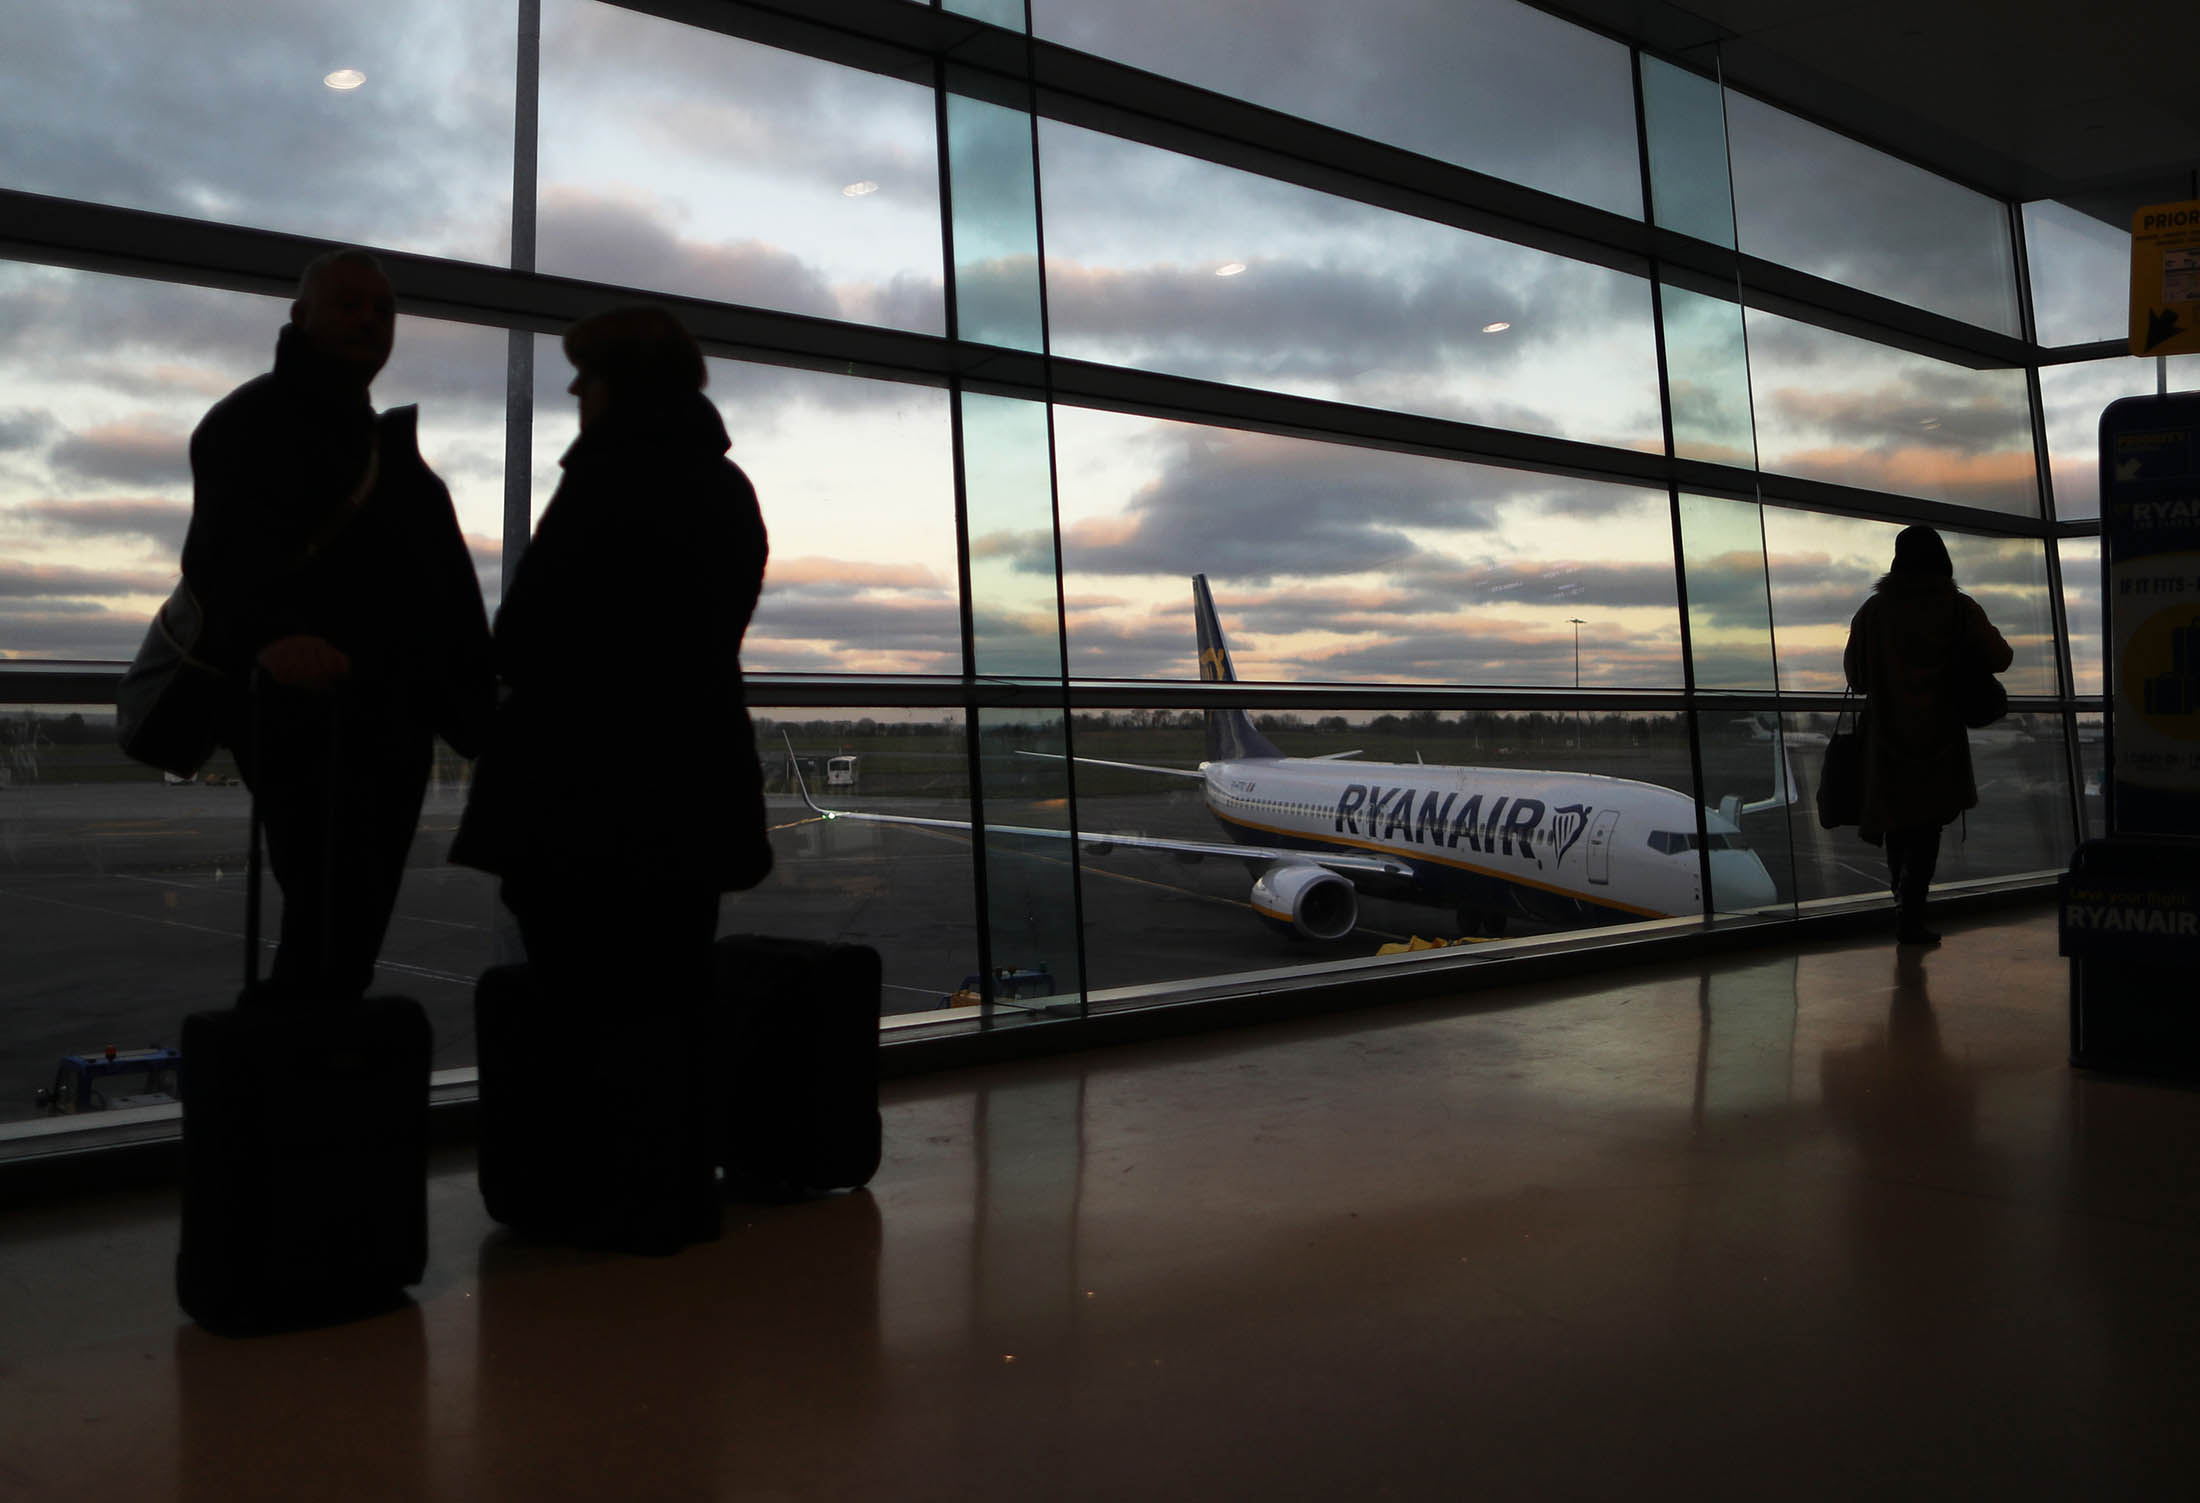 Ryanair Operating Chief Resigns Amid Fallout From Cancellations - Bloomberg